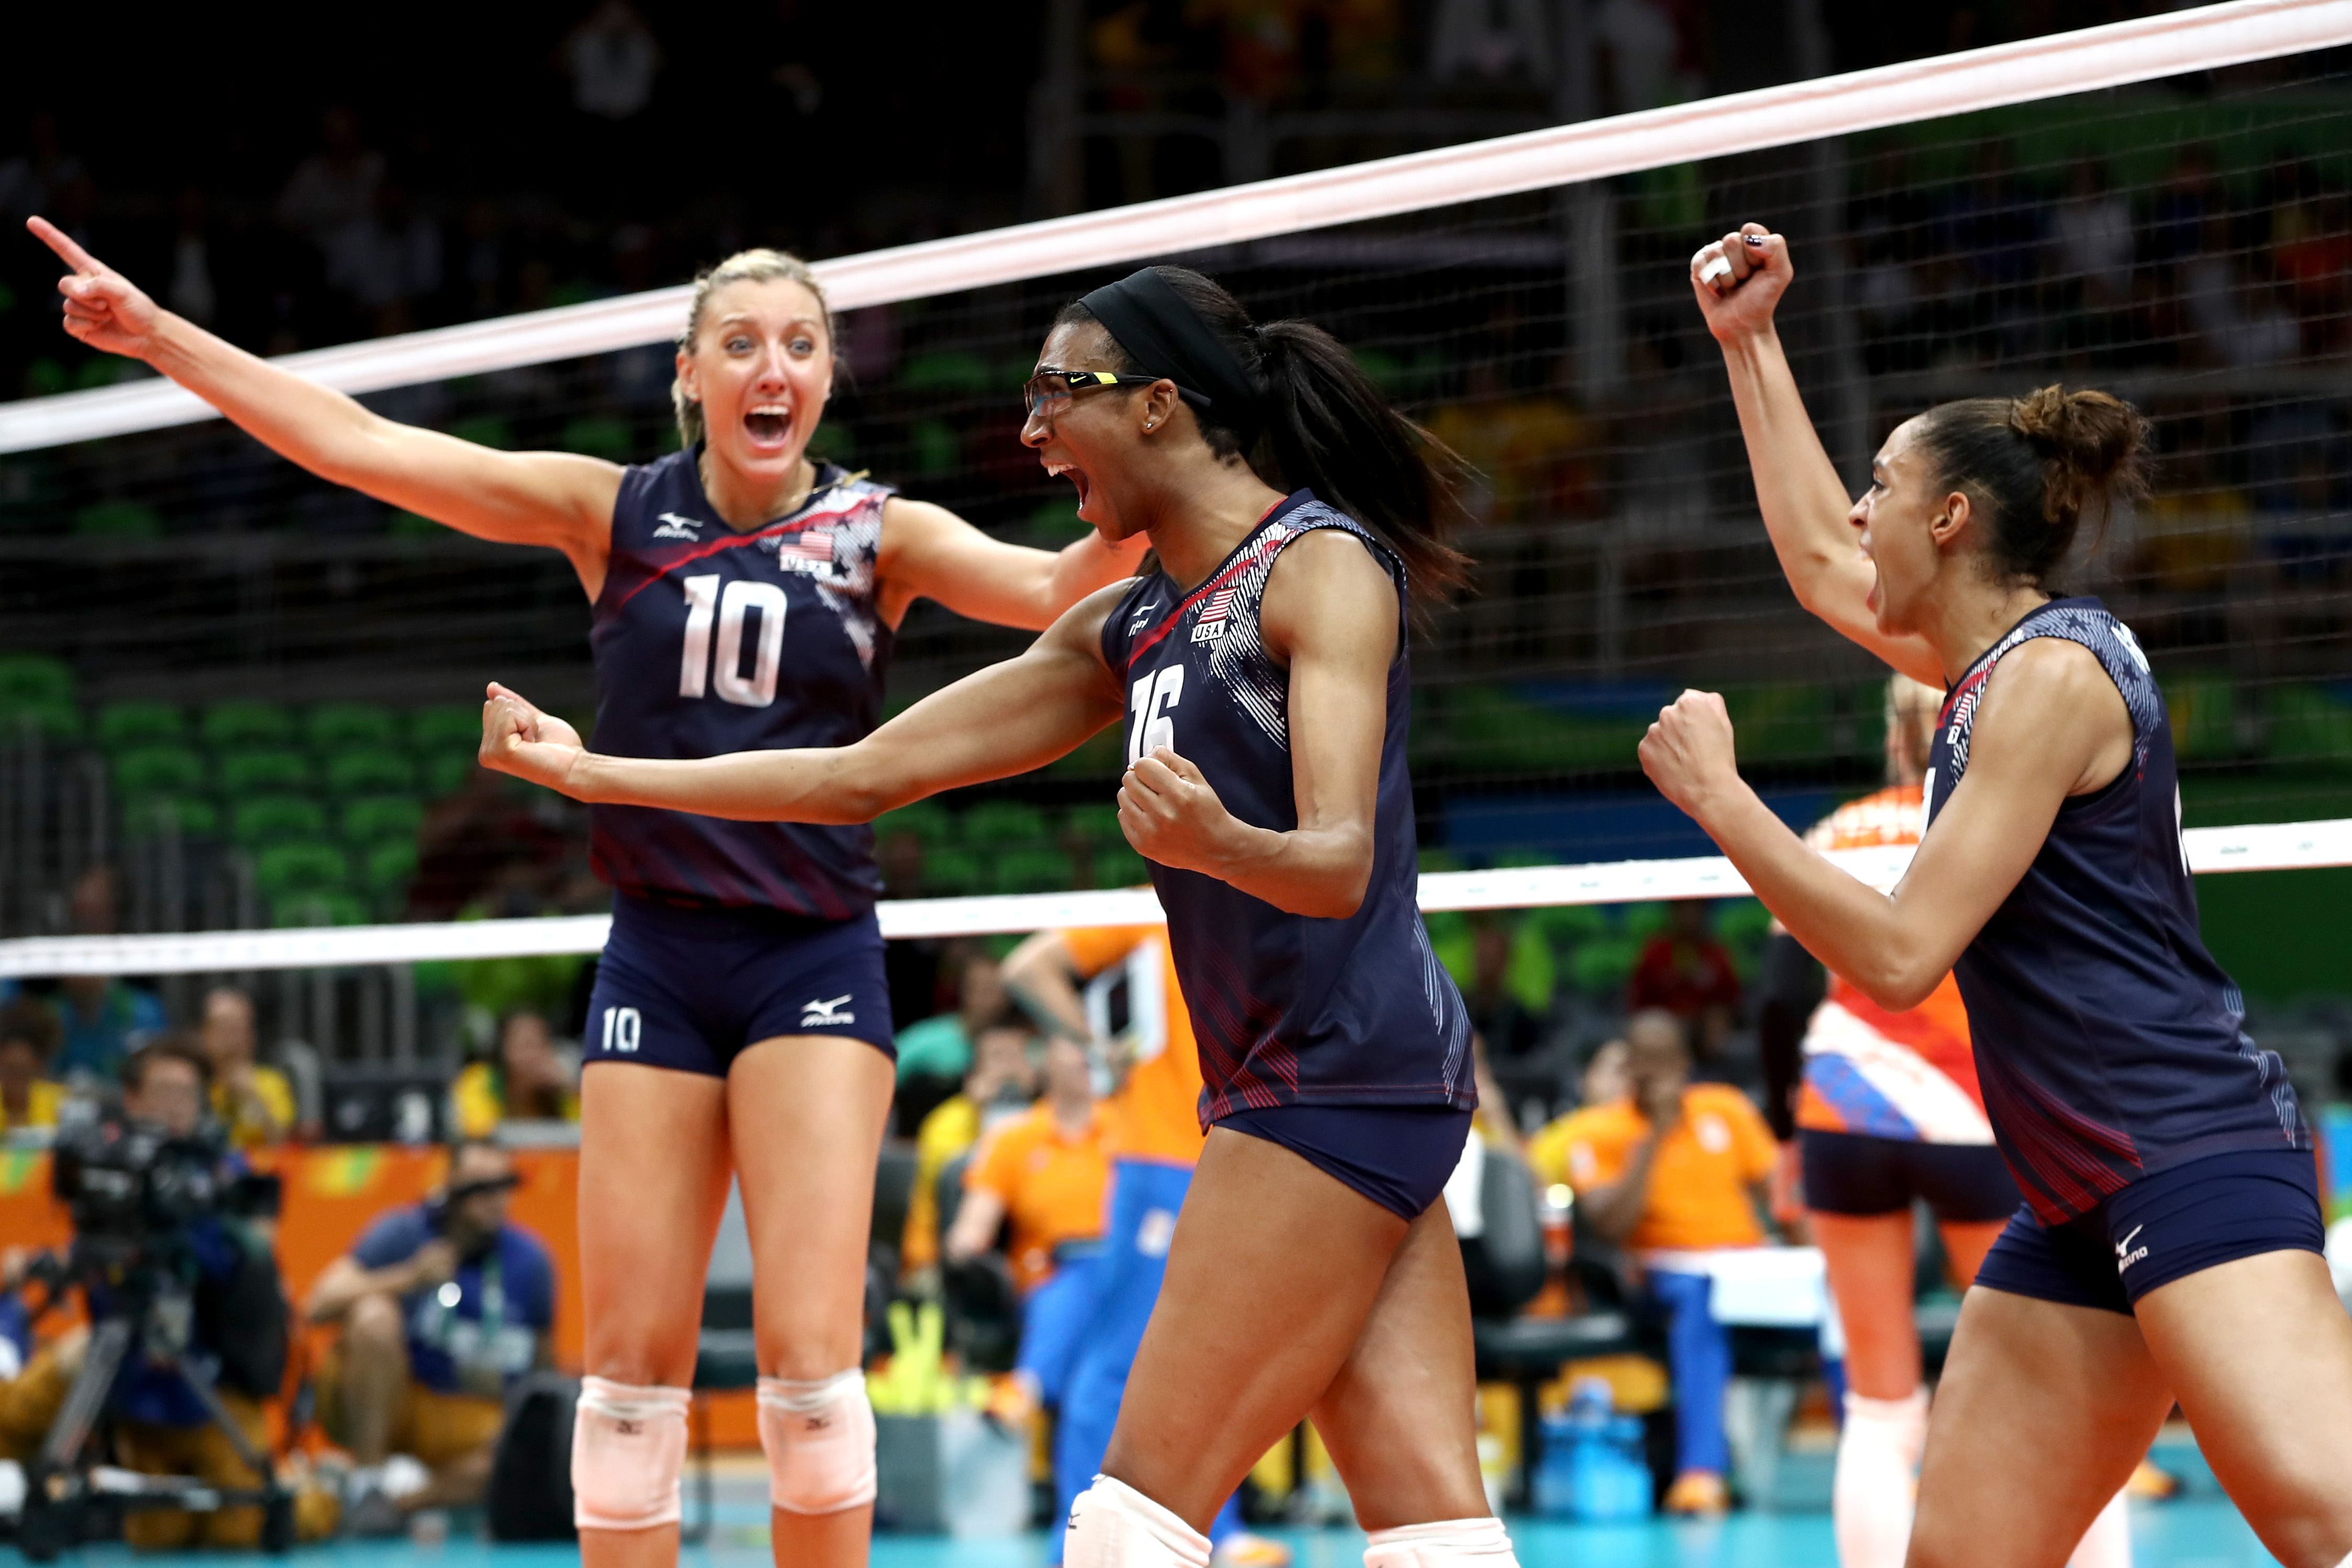 Jordan Larson-Burbach, Foluke Akinradewo and Alisha Glass of United States celebrate winning match point during the Women’s Bronze Medal Match between Netherlands and the United States on Day 15 of the Rio 2016 Olympic Games at the Maracanazinho on August 20, 2016 in Rio de Janeiro, Brazil.